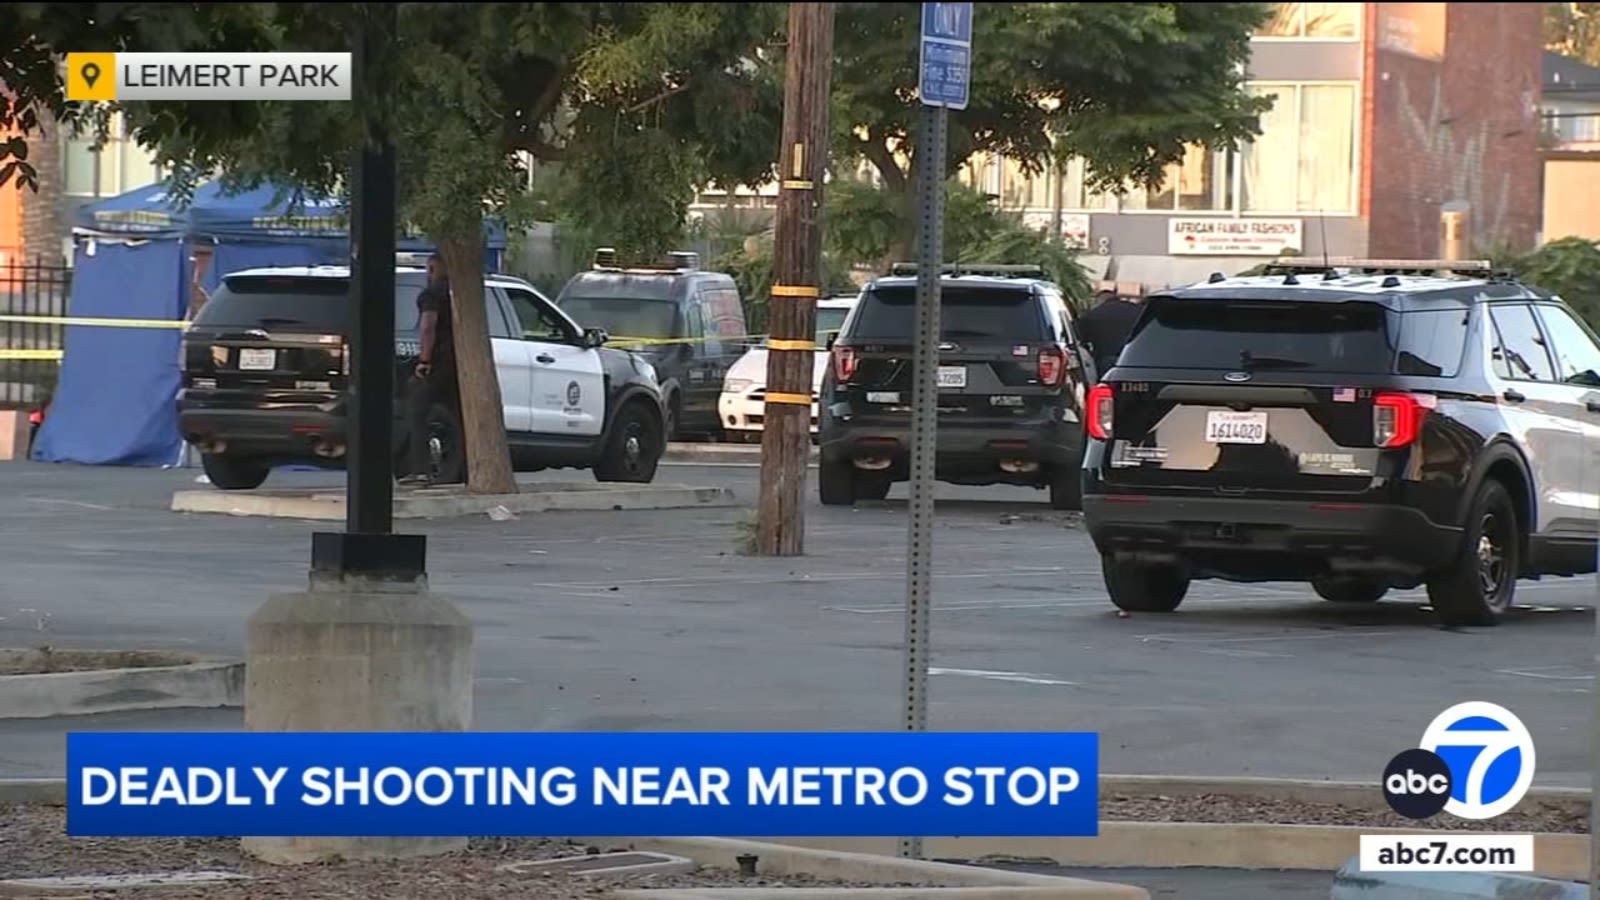 Man killed in gang-related shooting near Metro station in Leimert Park, LAPD says